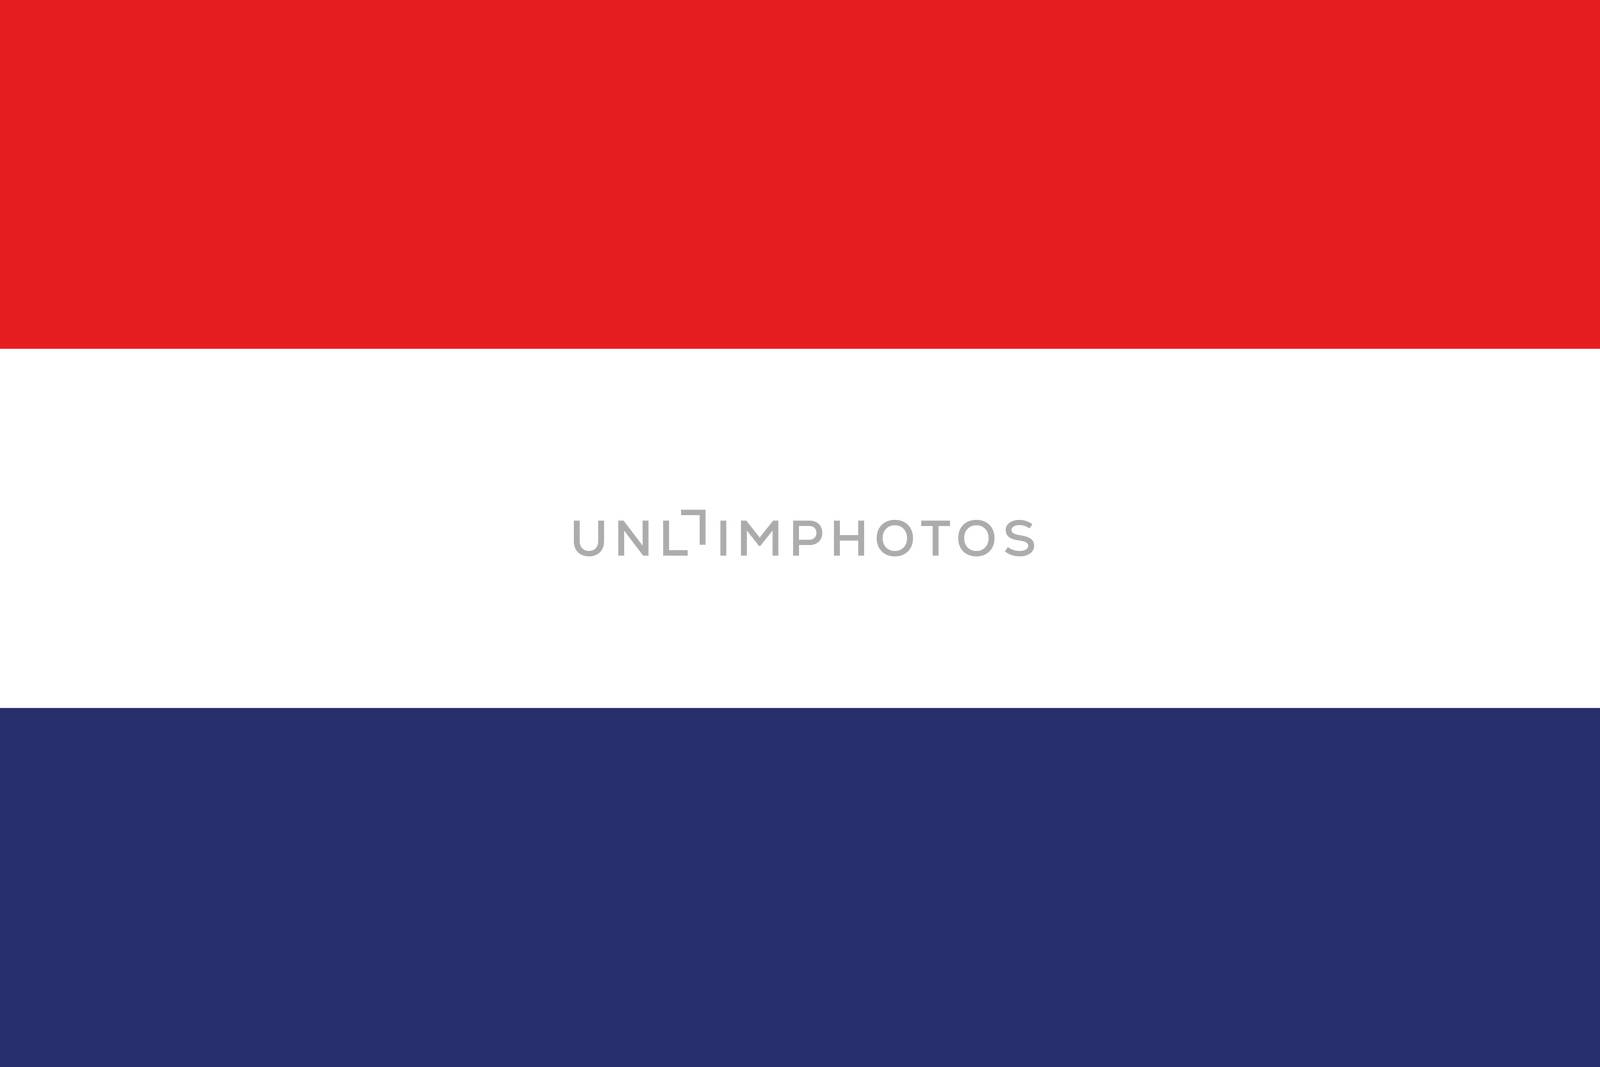 An illustration of the flag of Netherlands